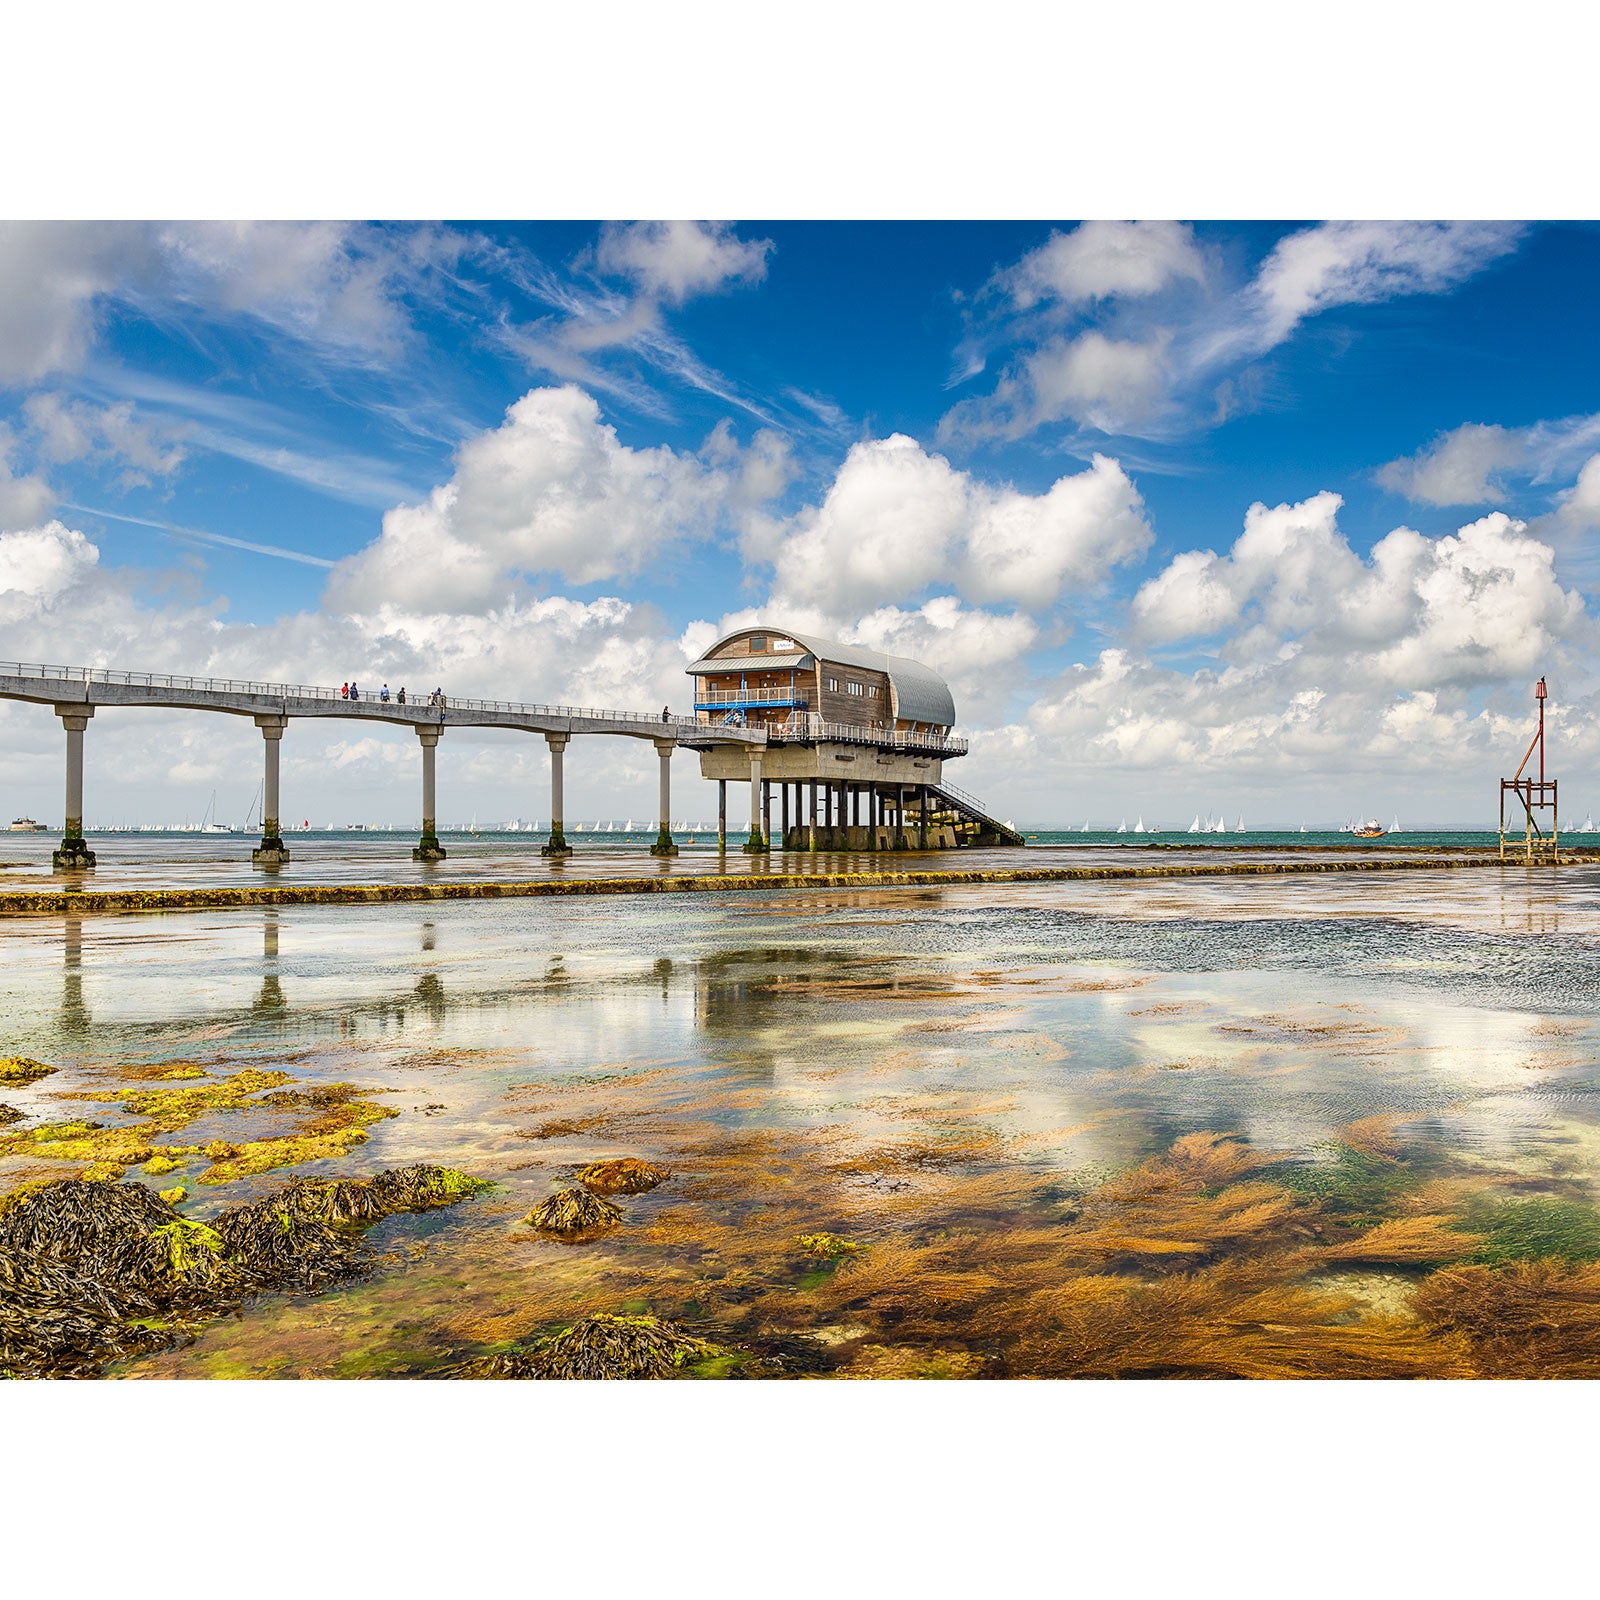 Elevated pier with a building at the end extending over shallow coastal waters off the Isle of Wight under a partly cloudy sky captured by Available Light Photography during the Round the Island Race at Bembridge Lifeboat Station.